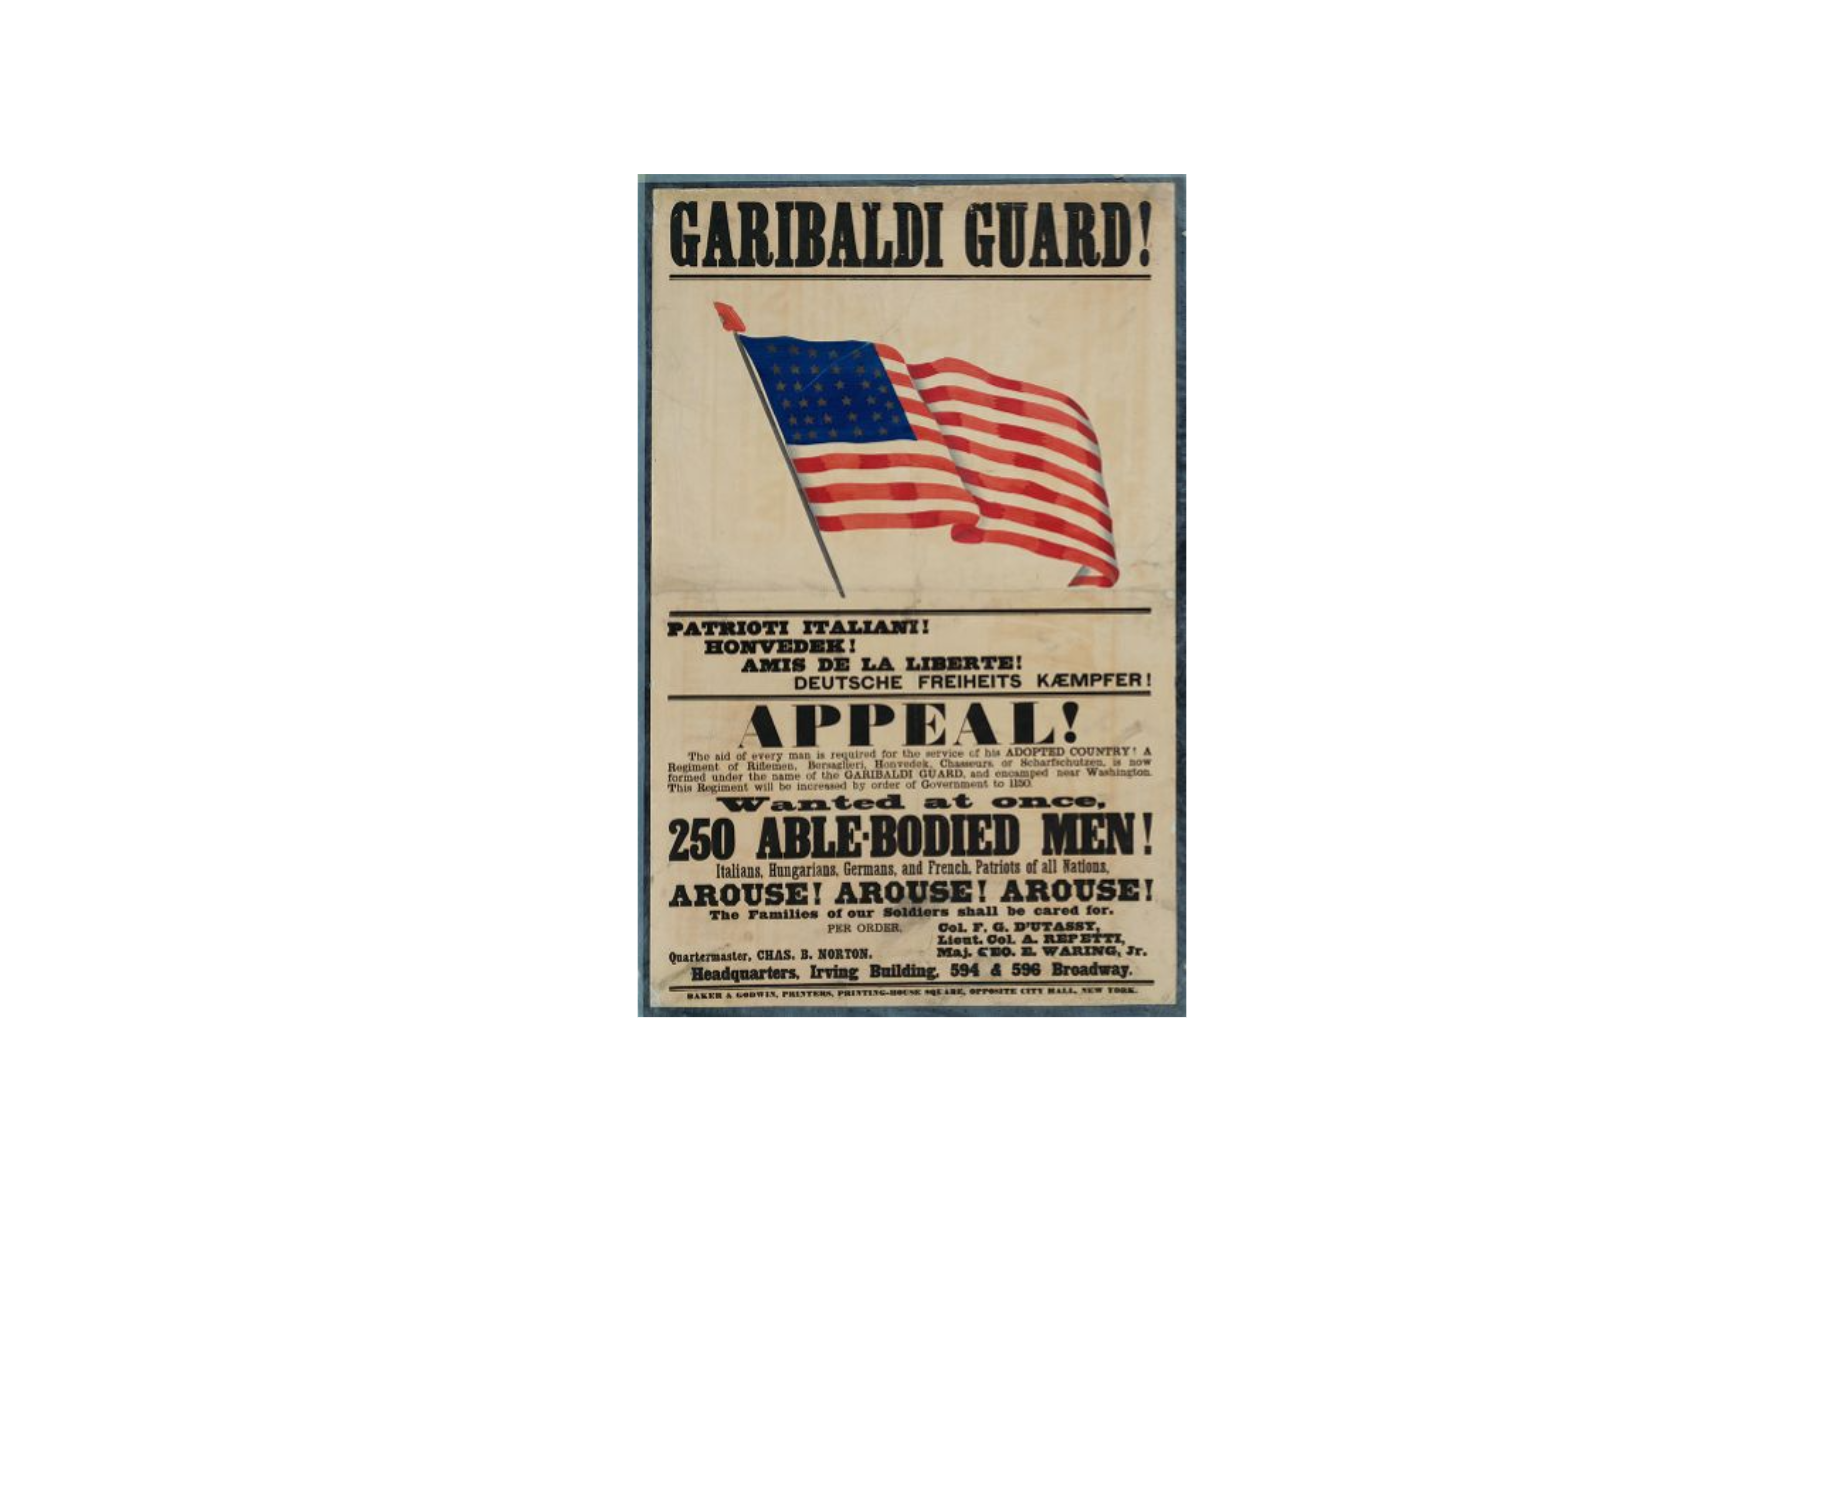 A US flag, with words Garibaldi Guard above, and appeals for 250 men